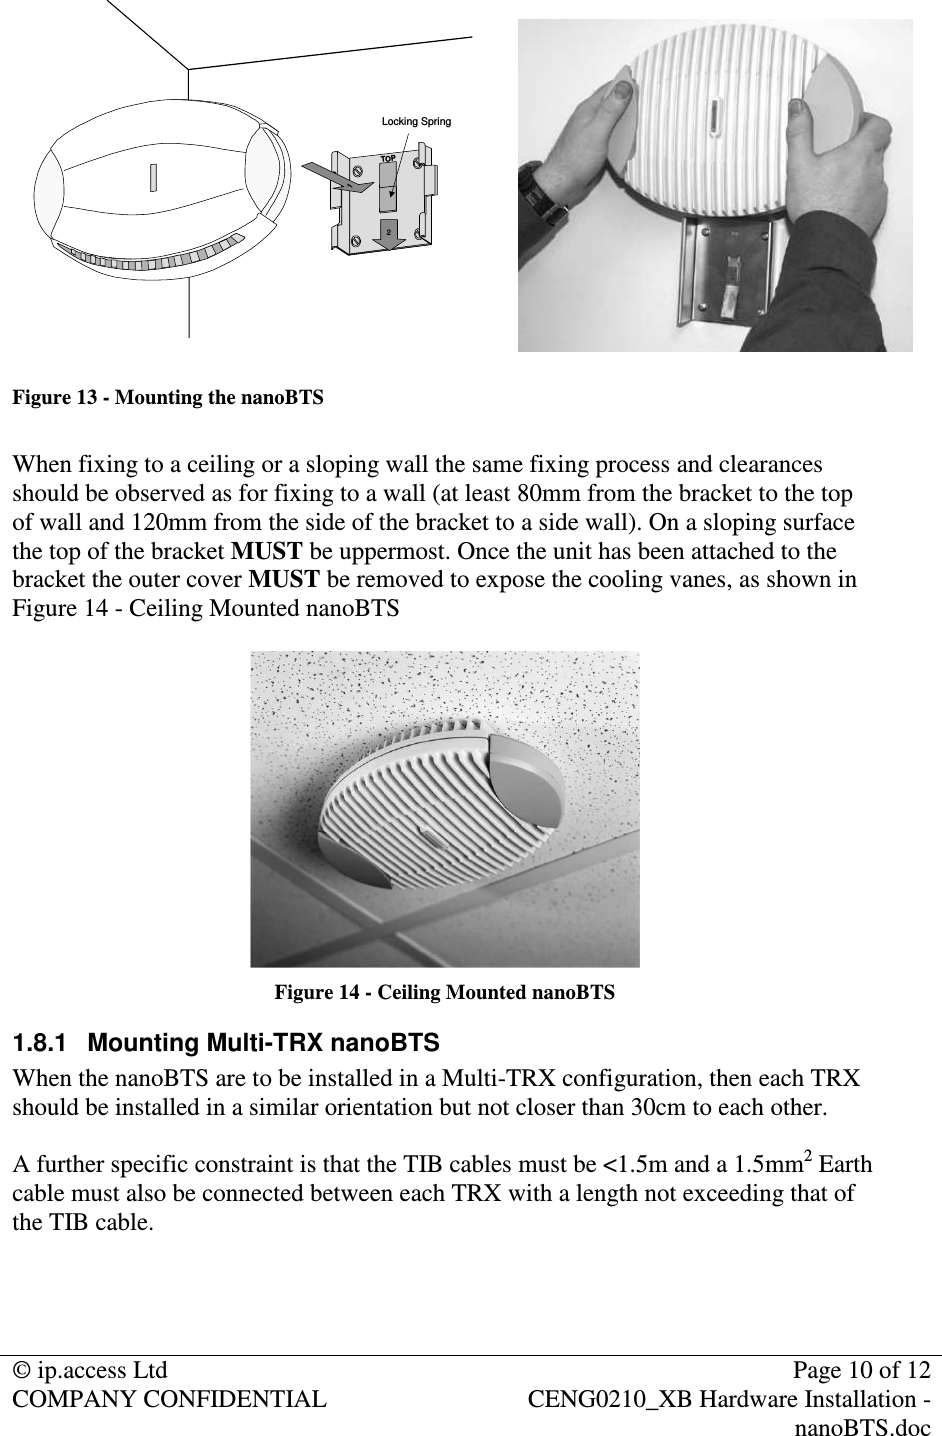 © ip.access Ltd  Page 10 of 12 COMPANY CONFIDENTIAL  CENG0210_XB Hardware Installation - nanoBTS.doc   2Locking Spring1TOP Figure 13 - Mounting the nanoBTS  When fixing to a ceiling or a sloping wall the same fixing process and clearances should be observed as for fixing to a wall (at least 80mm from the bracket to the top of wall and 120mm from the side of the bracket to a side wall). On a sloping surface the top of the bracket MUST be uppermost. Once the unit has been attached to the bracket the outer cover MUST be removed to expose the cooling vanes, as shown in Figure 14 - Ceiling Mounted nanoBTS   Figure 14 - Ceiling Mounted nanoBTS 1.8.1  Mounting Multi-TRX nanoBTS When the nanoBTS are to be installed in a Multi-TRX configuration, then each TRX should be installed in a similar orientation but not closer than 30cm to each other.  A further specific constraint is that the TIB cables must be &lt;1.5m and a 1.5mm2 Earth cable must also be connected between each TRX with a length not exceeding that of the TIB cable.   